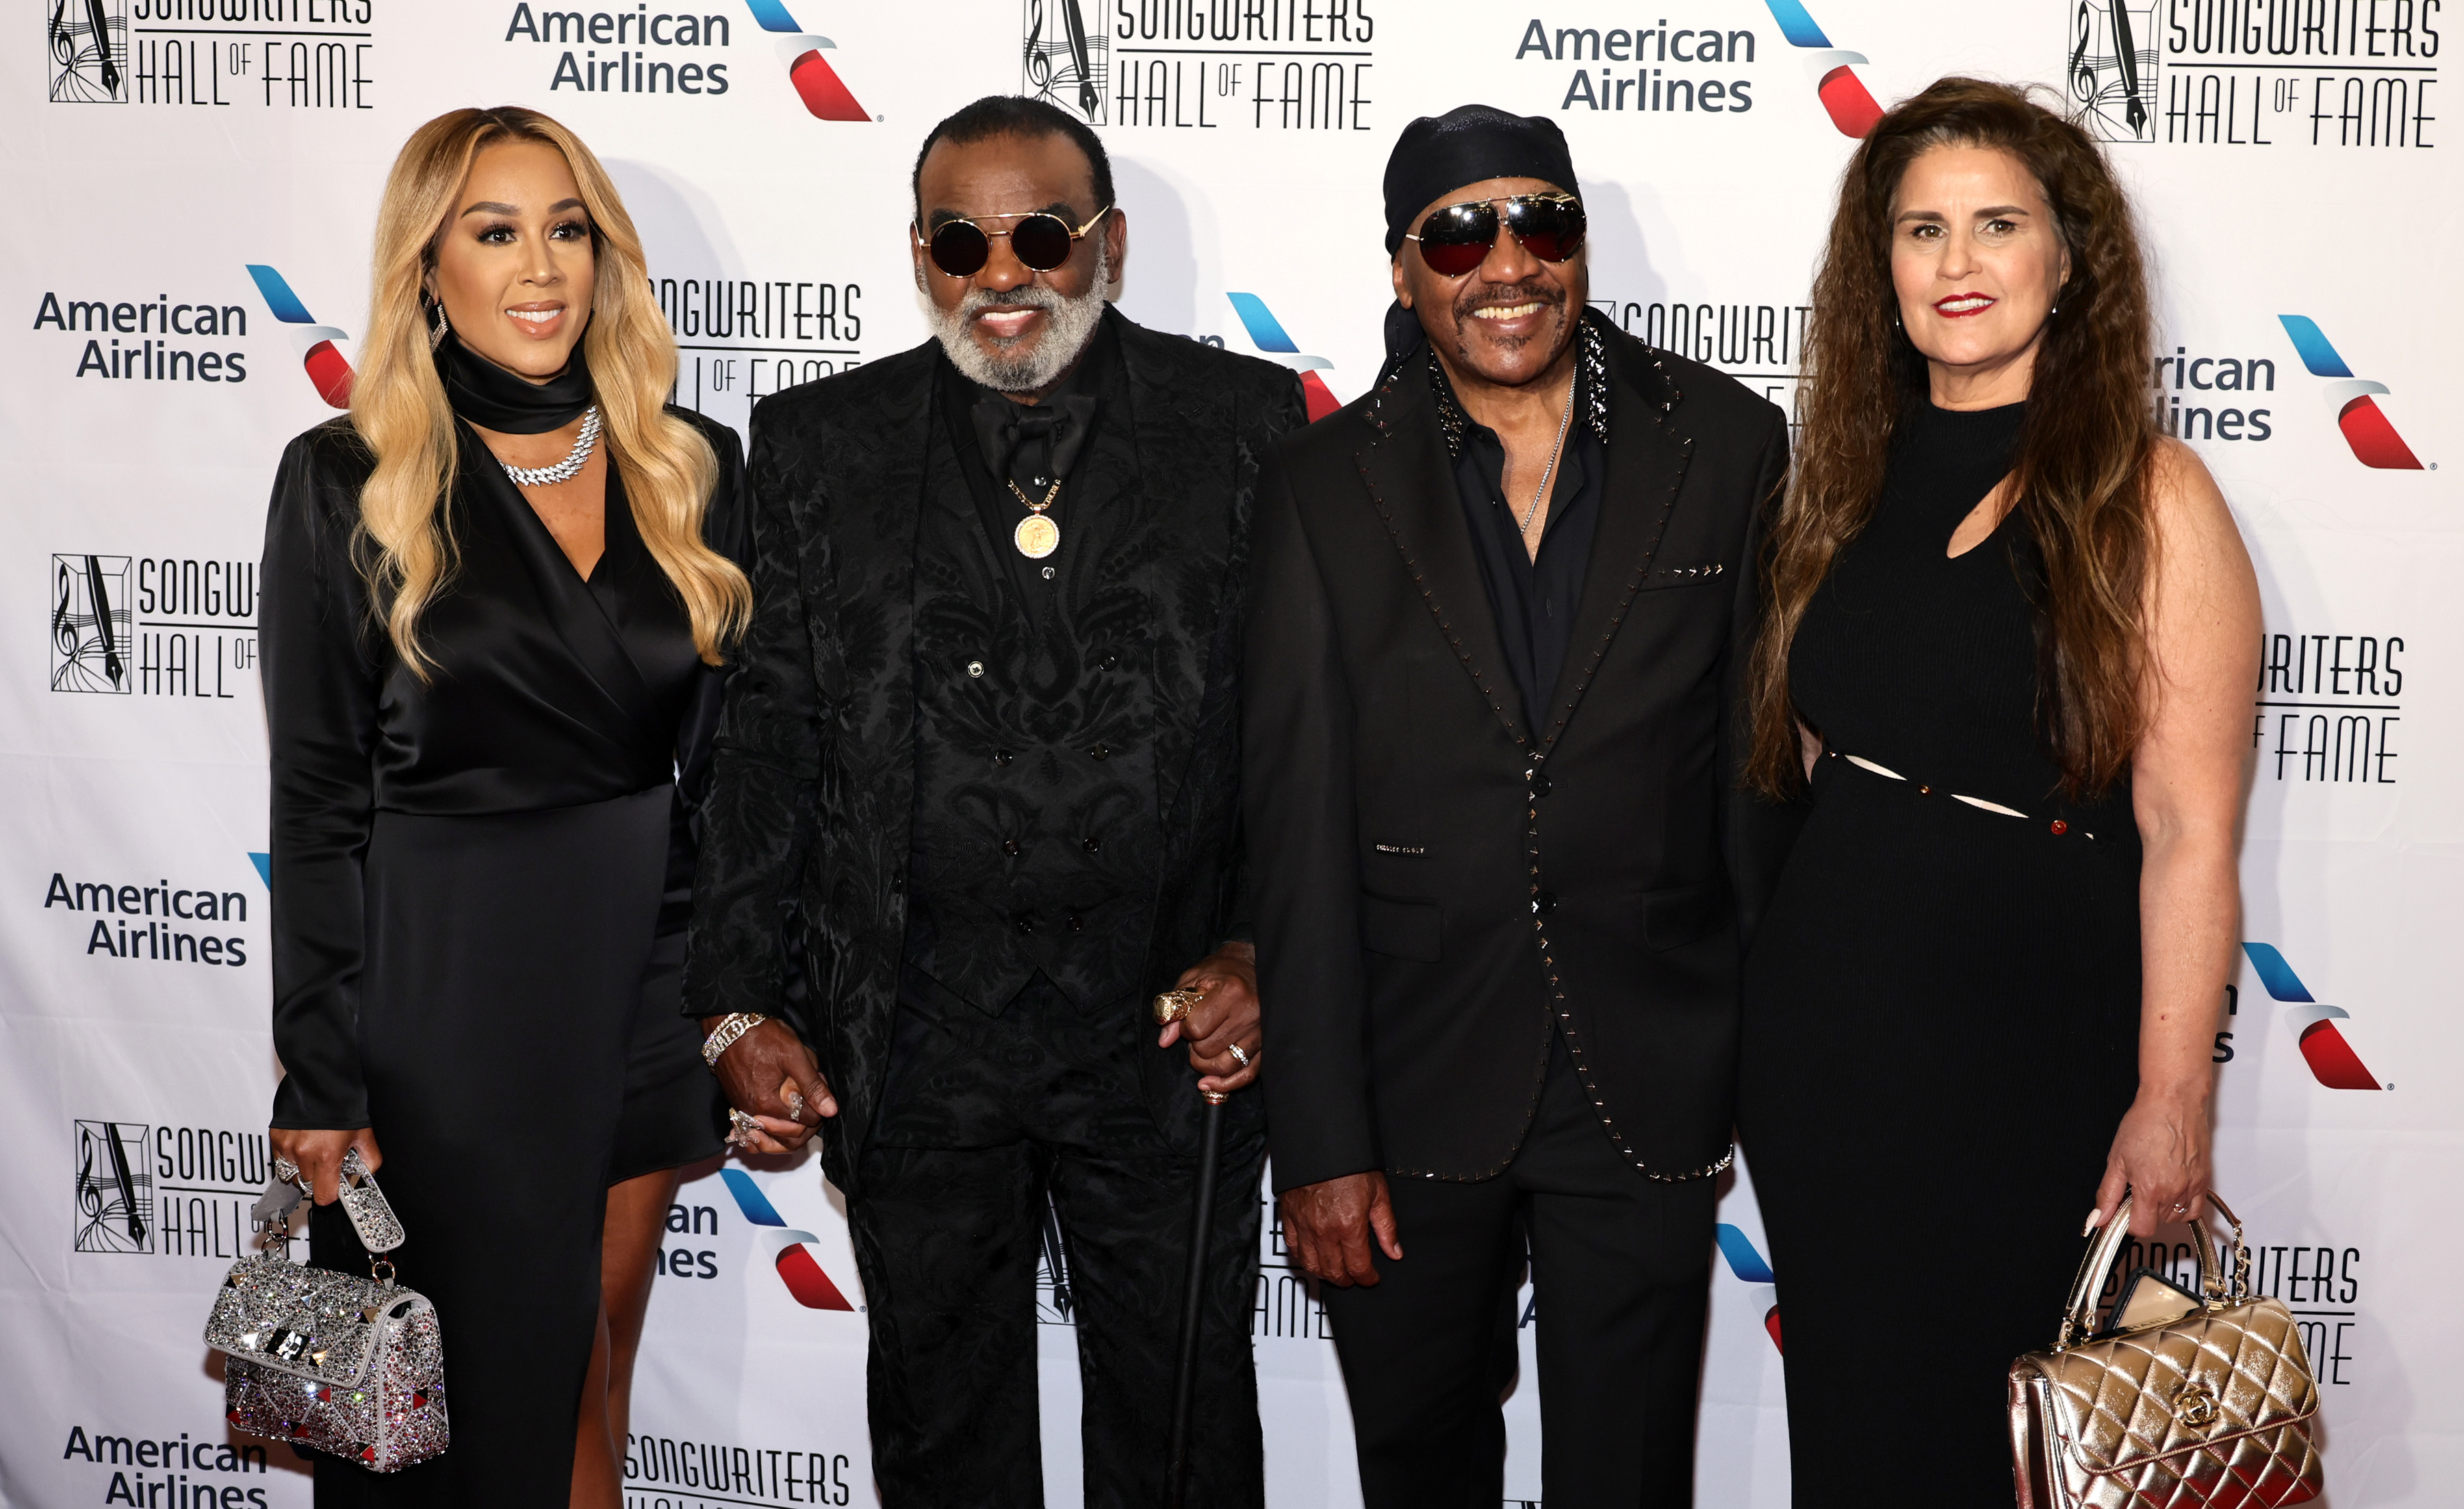 (L-R) Kandy Johnson Isley, Ron Isley, Ernie Isley, and Tracy Isley attend the Songwriters Hall of Fame 51st Annual Induction and Awards Gala at Marriott Marquis on June 16, 2022, in New York City. | Source: Getty Images